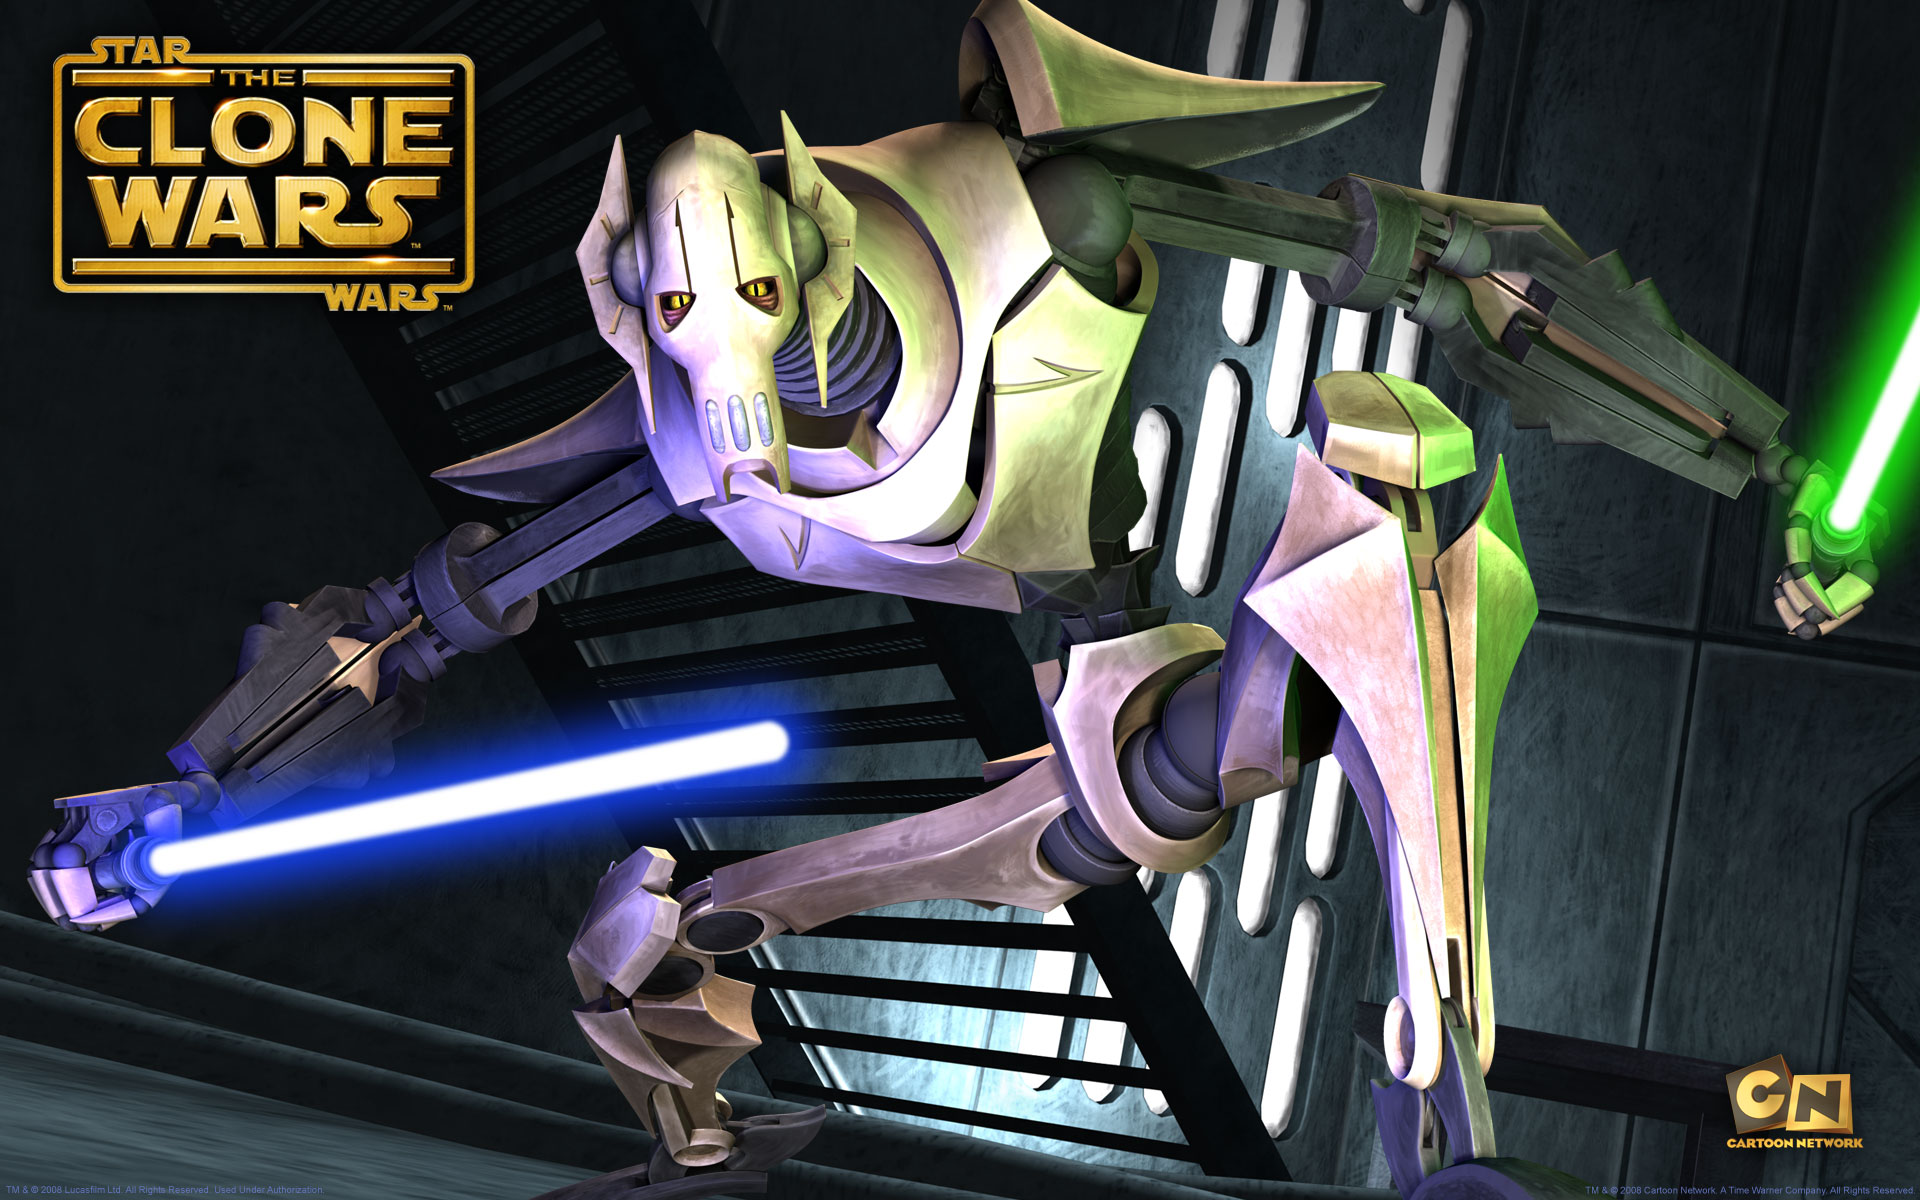 Wallpaper Picture Of General Grievous Holding A Light Saber From Star